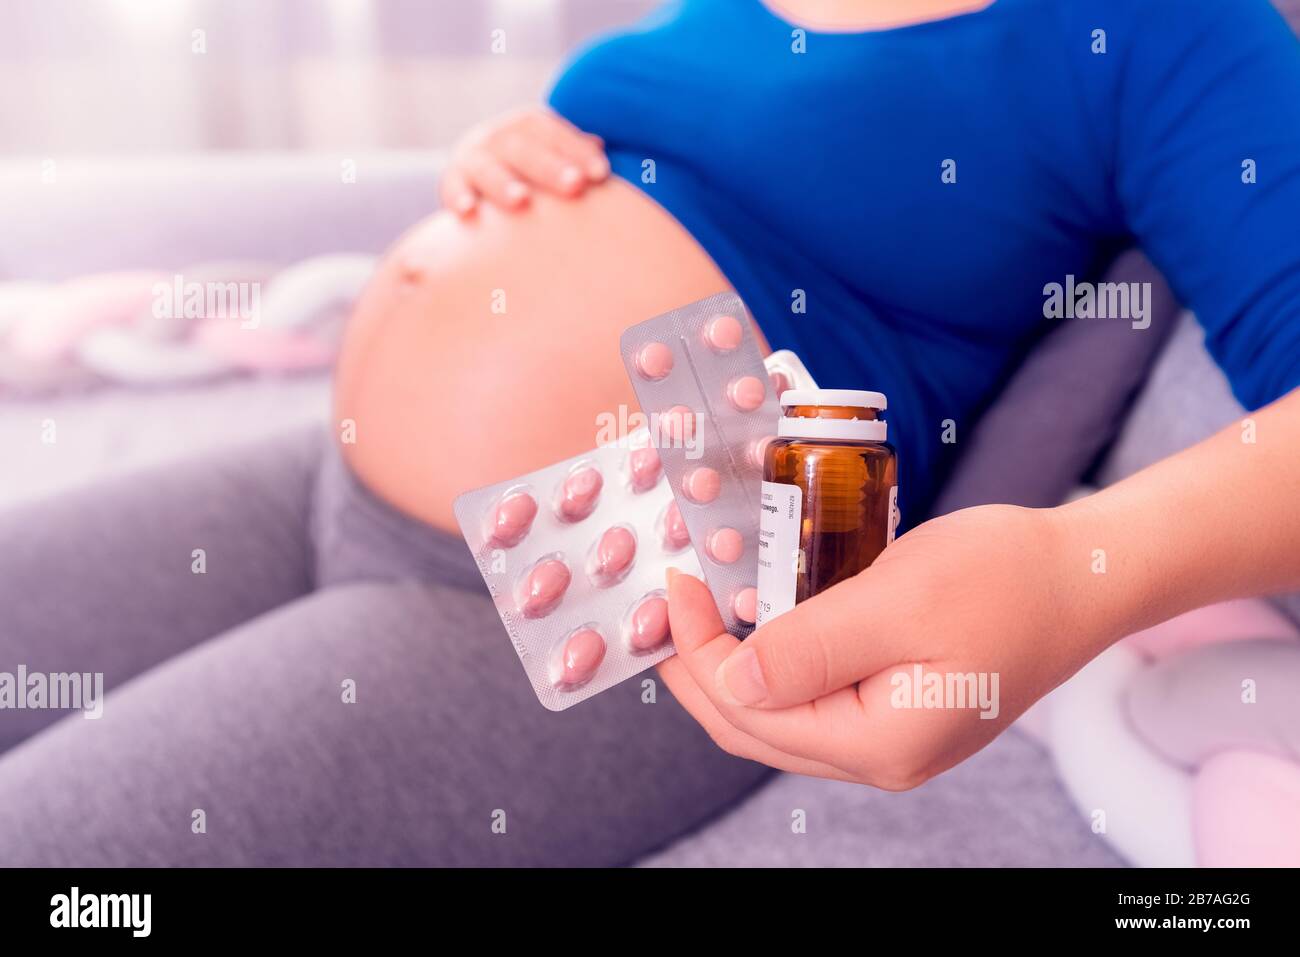 Vitamins during pregnancy. Pregnant woman holding pills in her hand and exposing her belly. Stock Photo